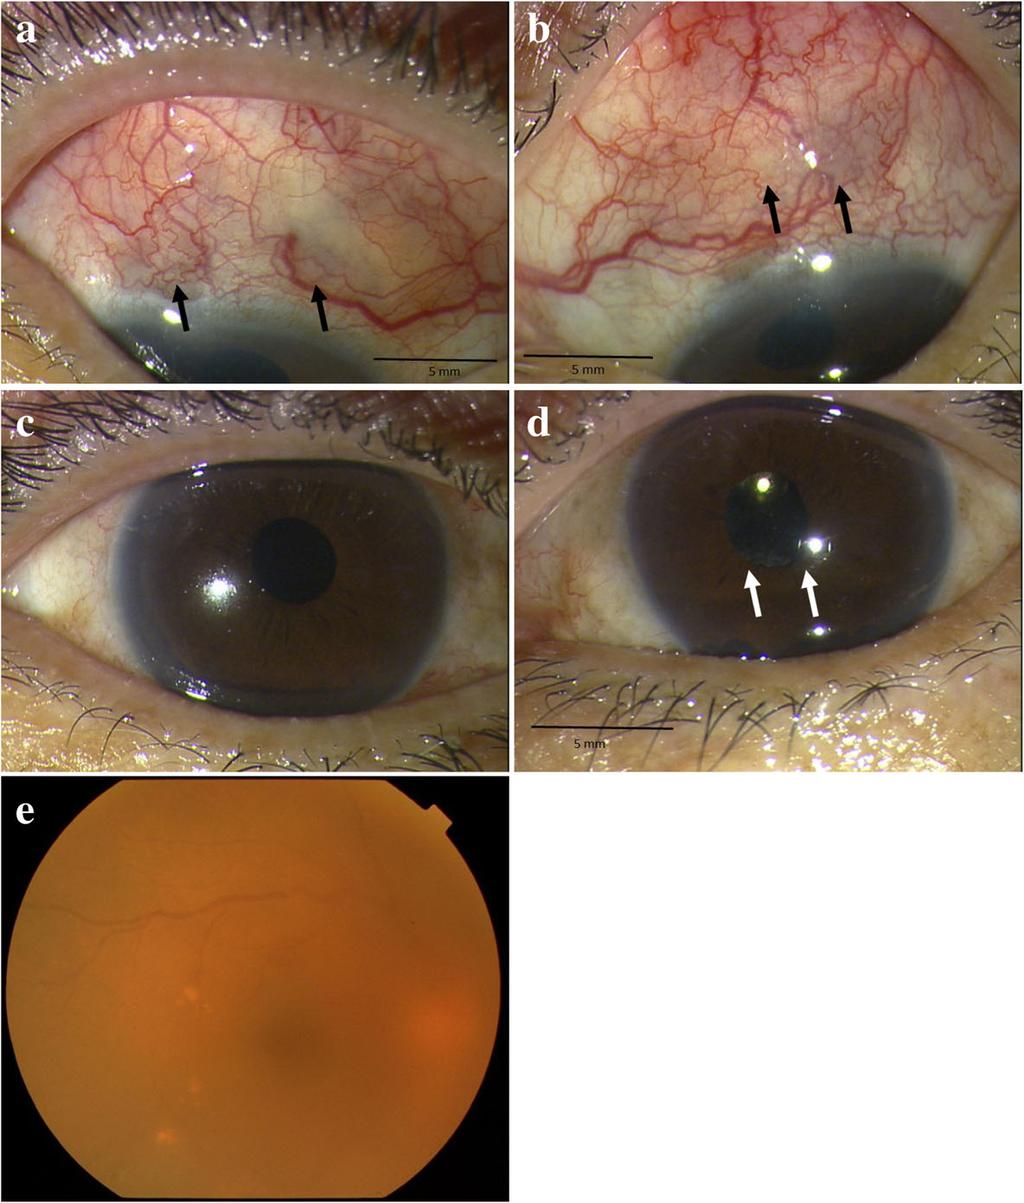 Kobayashi et al. BMC Ophthalmology (2018) 18:129 Page 2 of 5 as bilateral anterior scleritis and prescribed steroid eye drops for treatment.